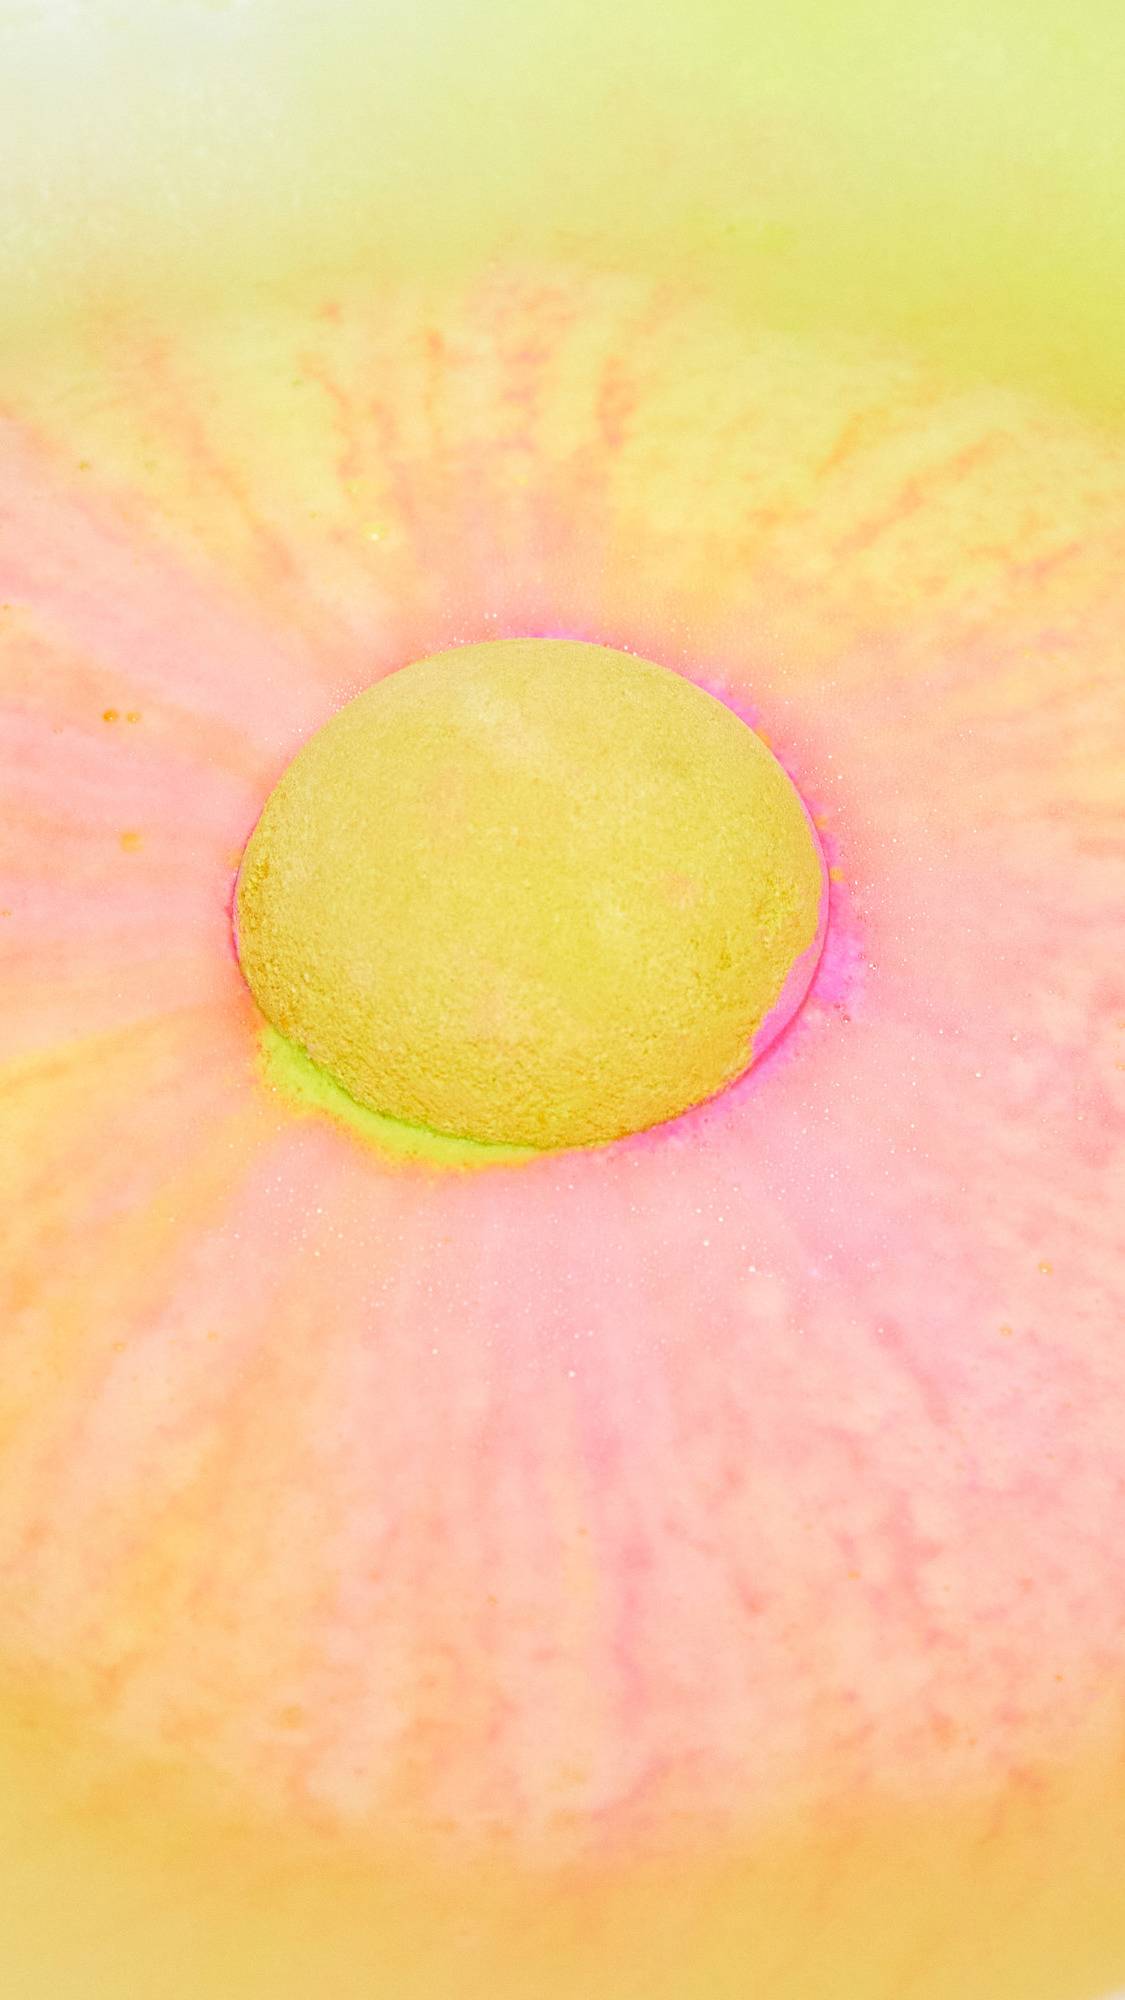 The Time Of The Season bath bomb has been placed into the bath water where it sits like a giant round sun in the centre shooting off swirls of bright yellow and subtle pink like a sunset.